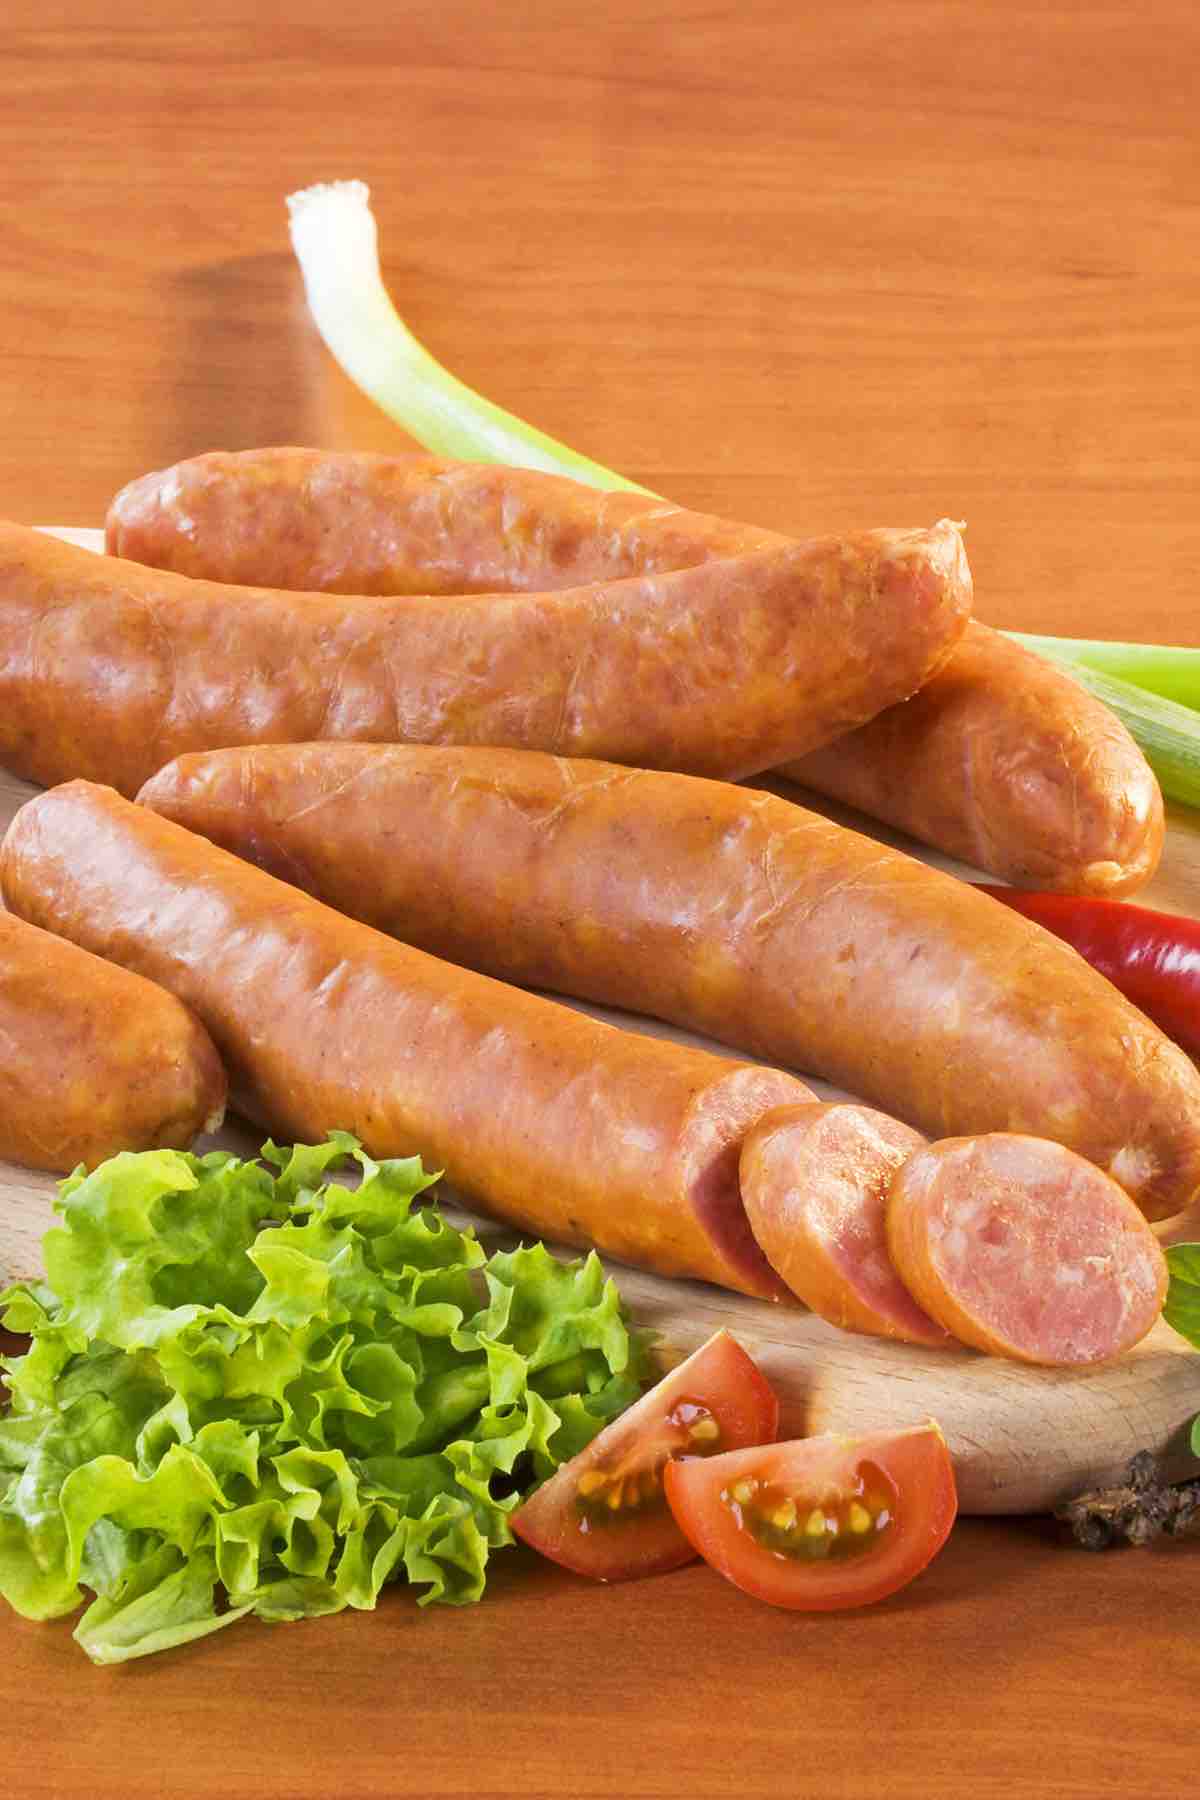 Polish sausage is smoky, flavorful, and delicious. It's a great addition to many dishes. We've rounded up 9 Best Polish Sausage Recipes that are easy to make at home. Whether you're craving pasta, sandwiches, or potato casserole, you'll fall in love with this delectable meat.